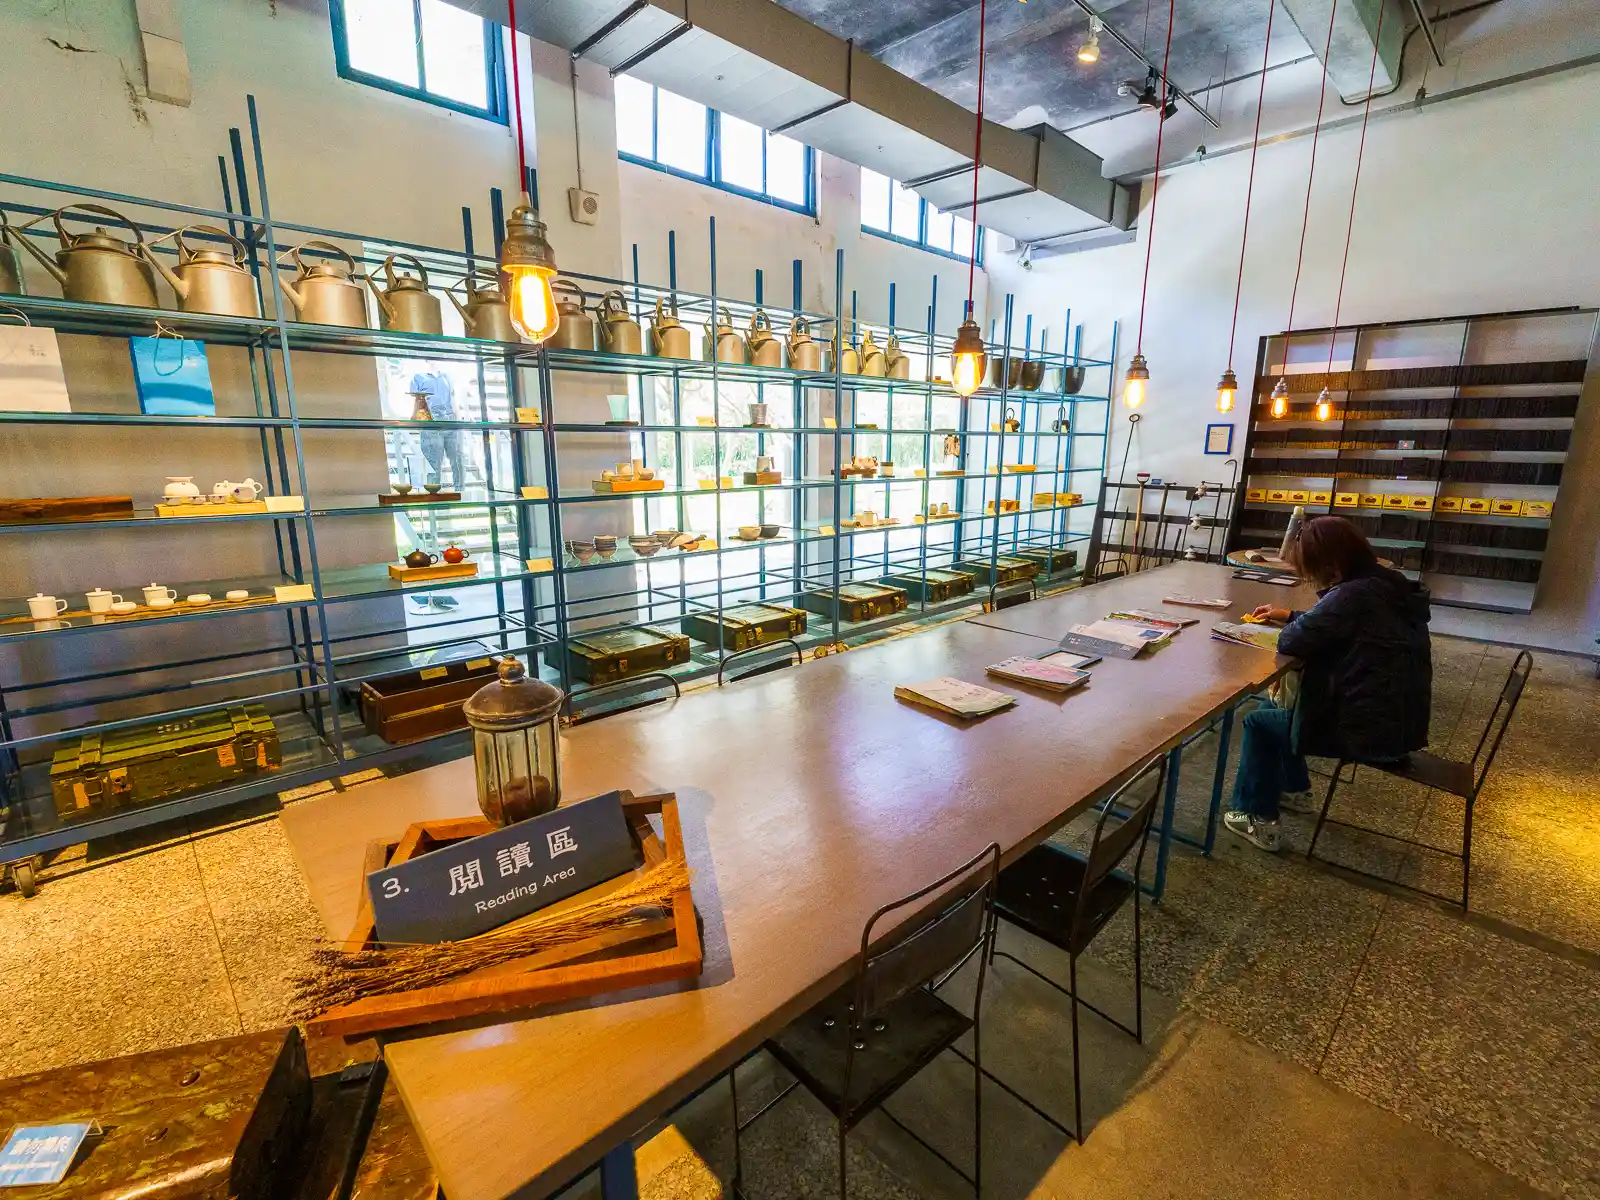 Teaware is displayed on shelves surrounding a long table in the reading area.